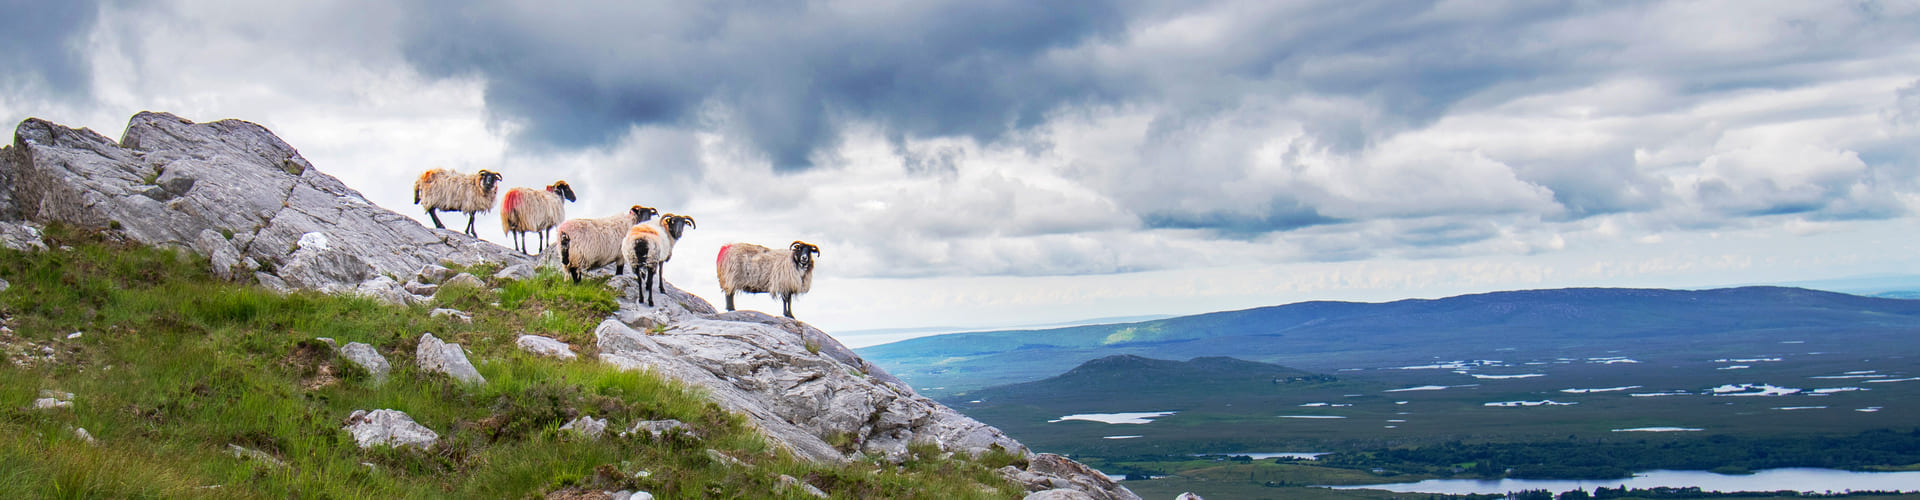 small flock of sheep standing on a rocky outcrop overlooking the derry mountains